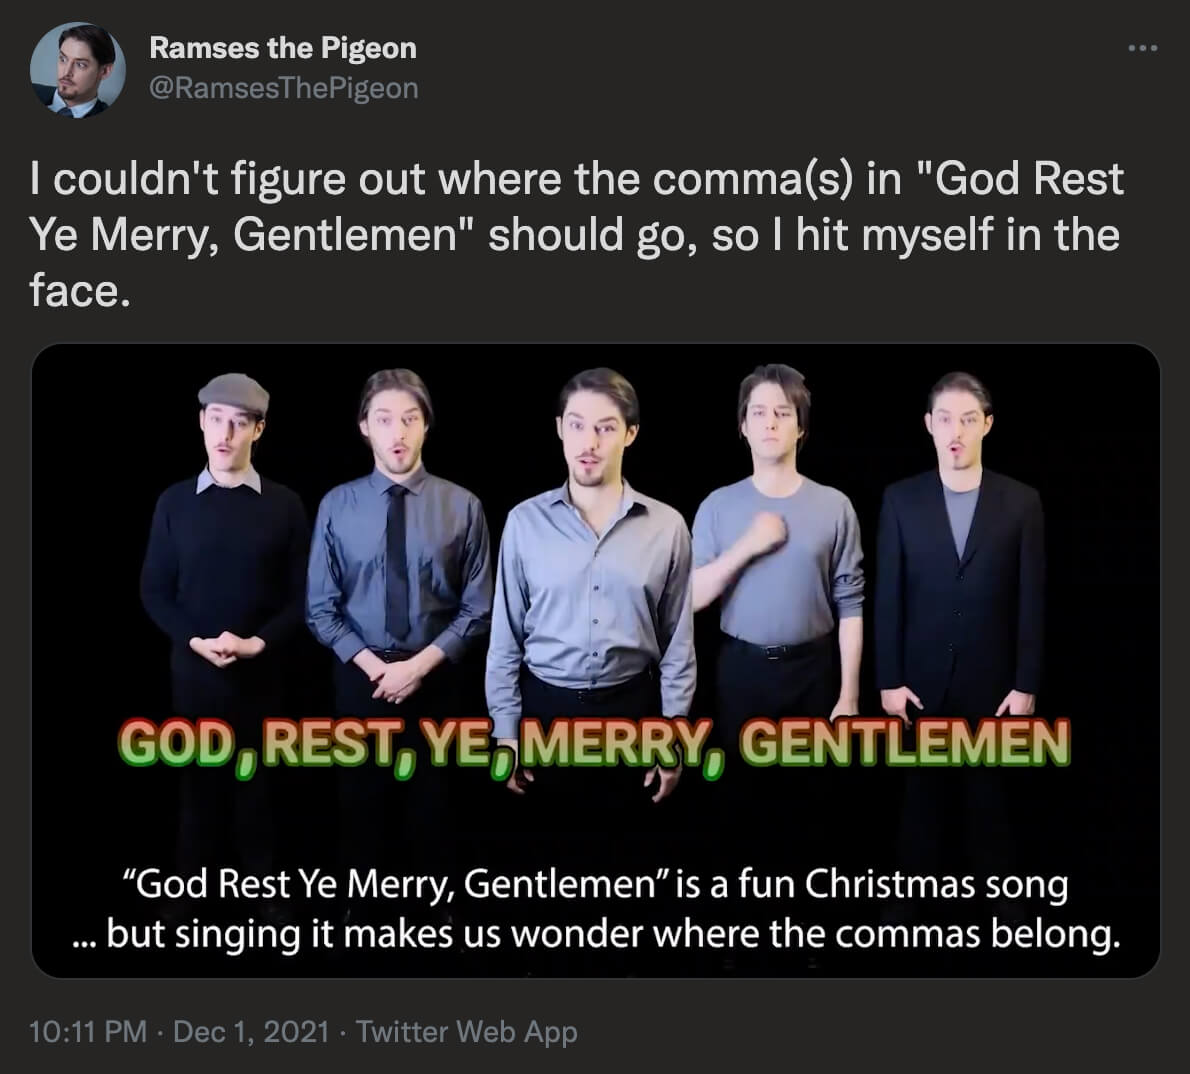 @RamsesThePigeon on Twitter: I couldn't figure out where the comma(s) in God Rest Ye Merry, Gentlemen should go, so I hit myself in the face. -God Rest Ye Merry Gentlemen parody video-